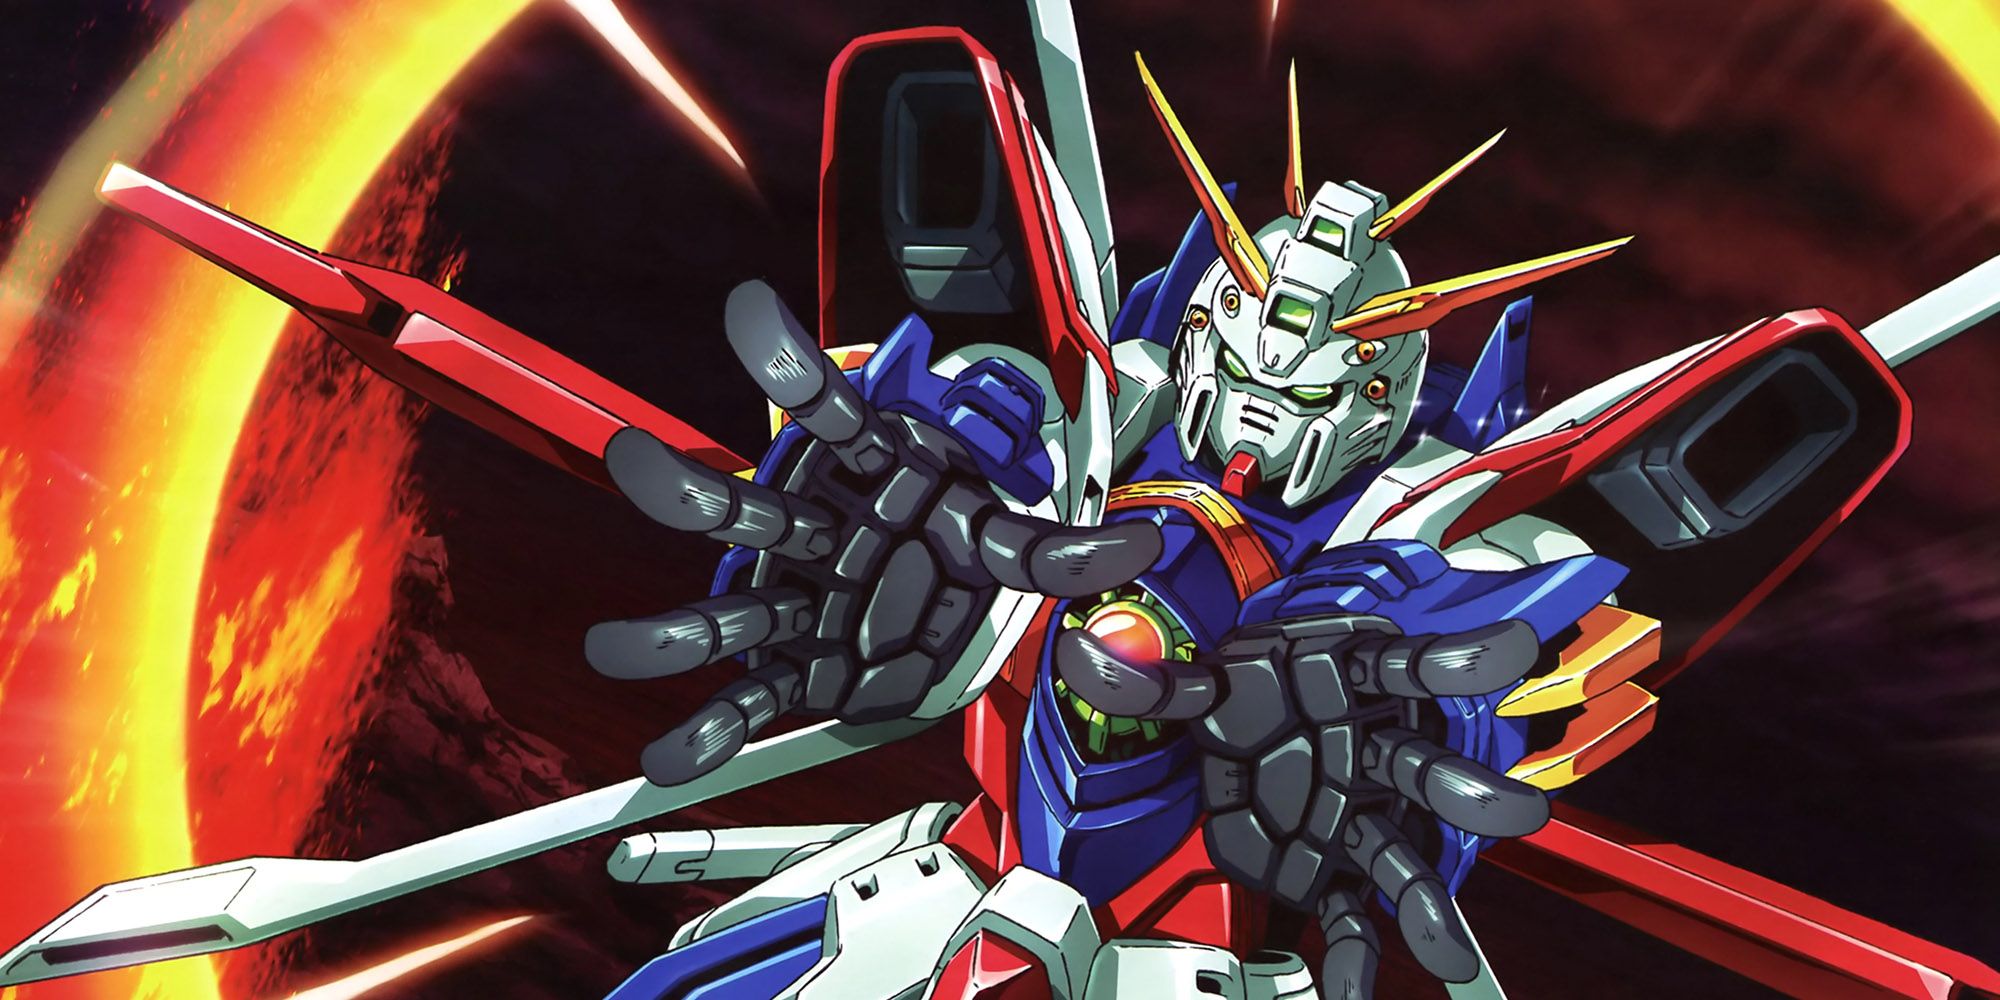 God Gundam From Mobile Fighter G Gundam Getting Ready For An Attack